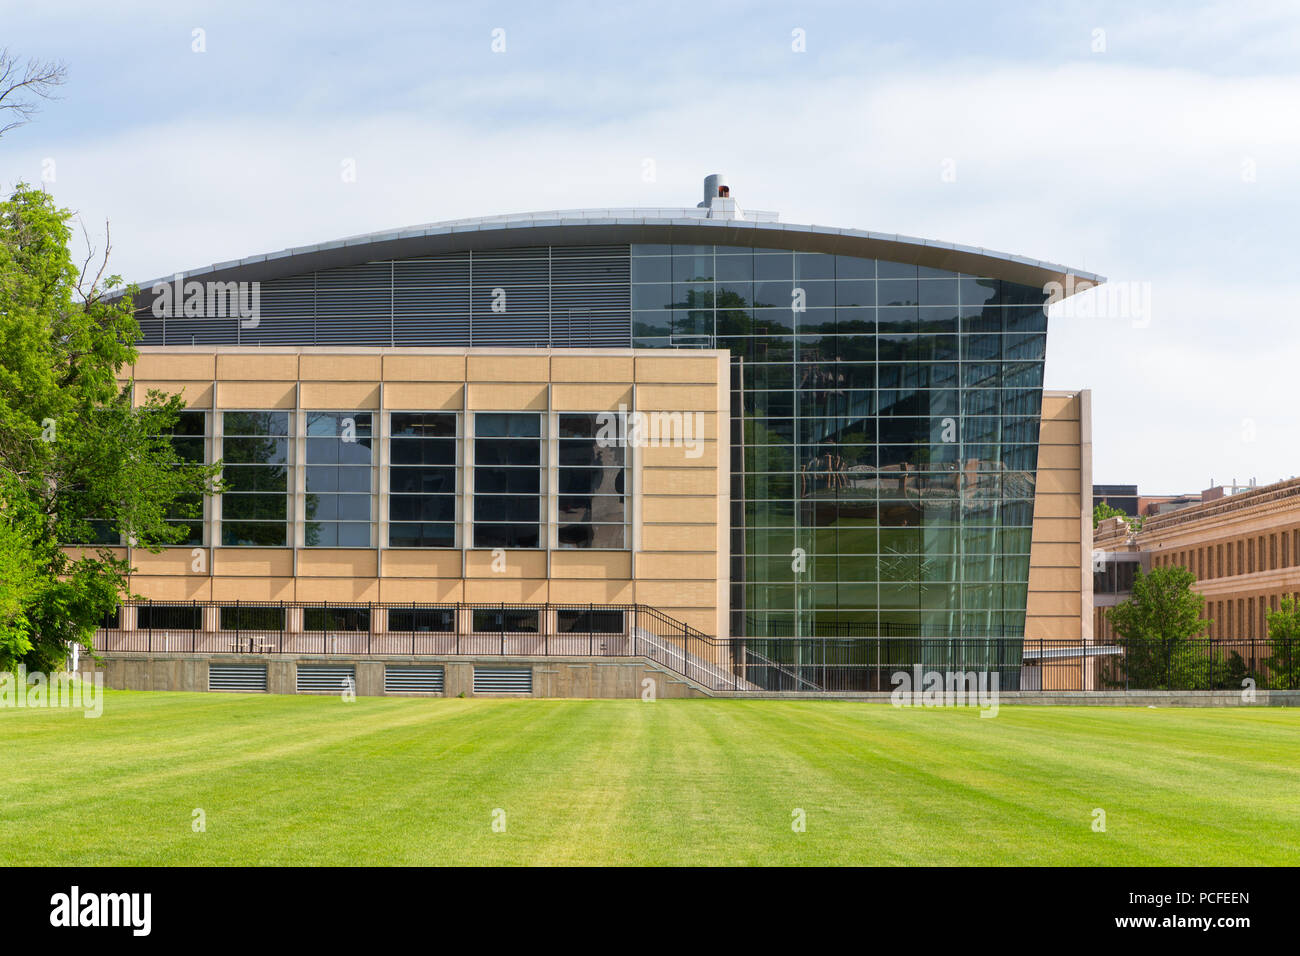 MADISON, WI/USA - JUNE 26, 2014: Department of Mechanical Engineering on the campus of the University of Wisconsin-Madison. Stock Photo